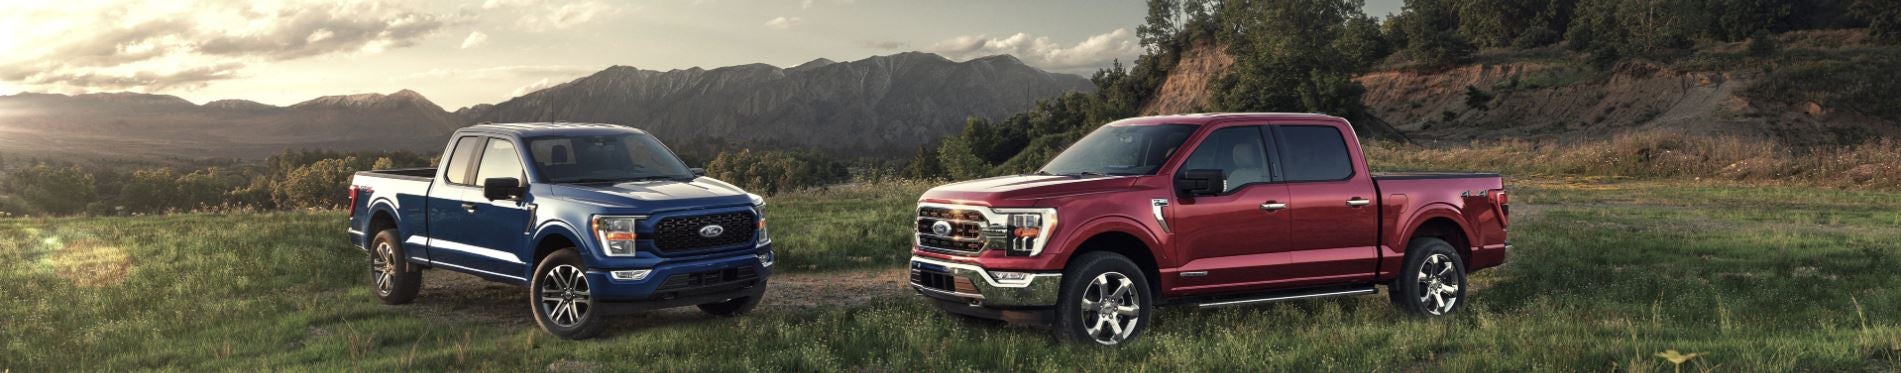 2021 Ford F-150 Model Review in Dallas, GA at Hardy Family Ford